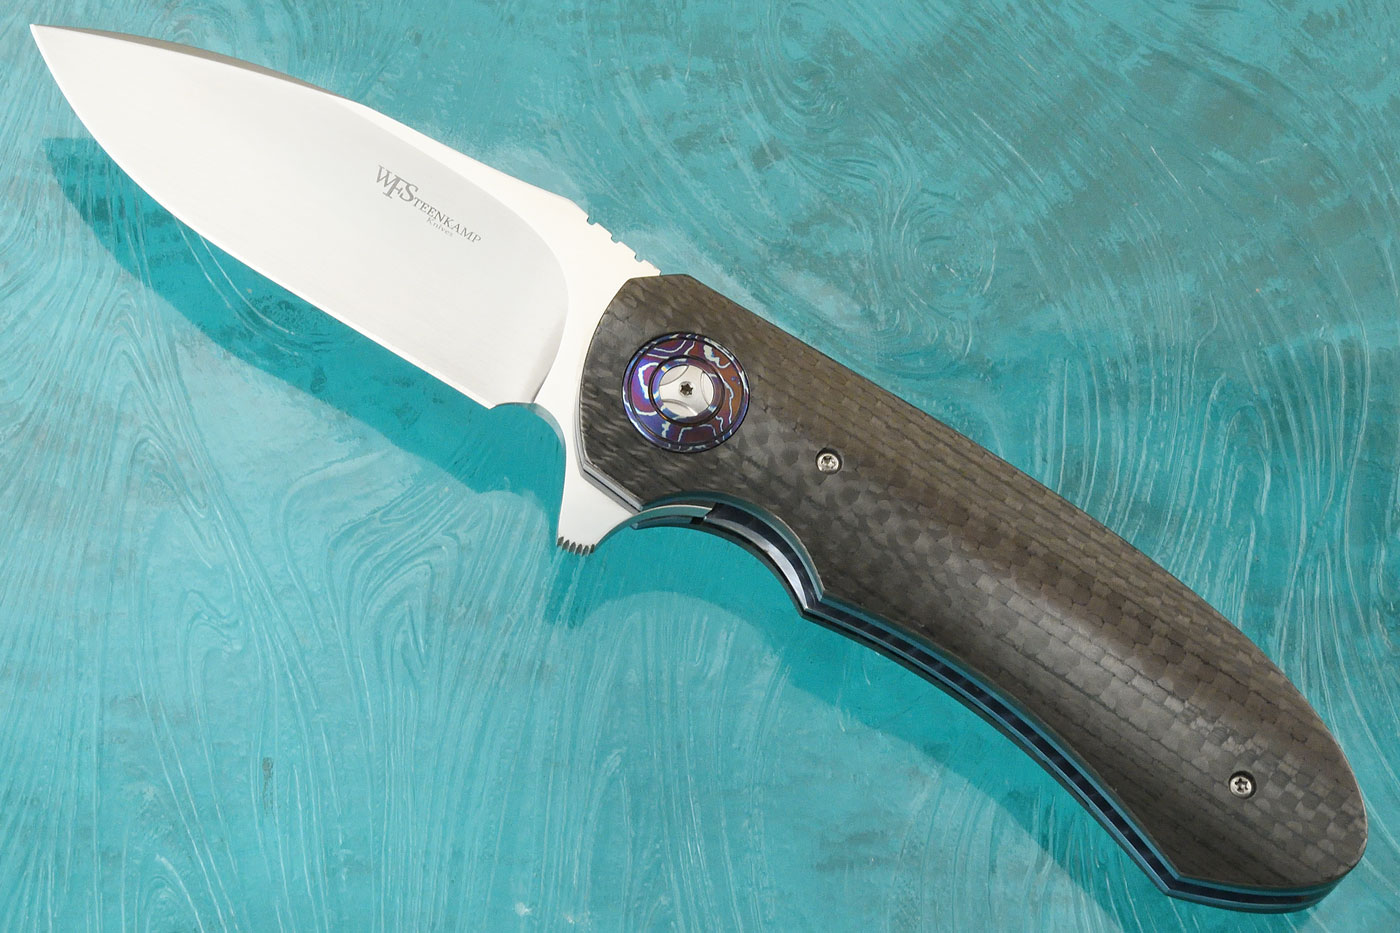 Hornet Flipper with Carbon Fiber and Timascus (IKBS) - M390